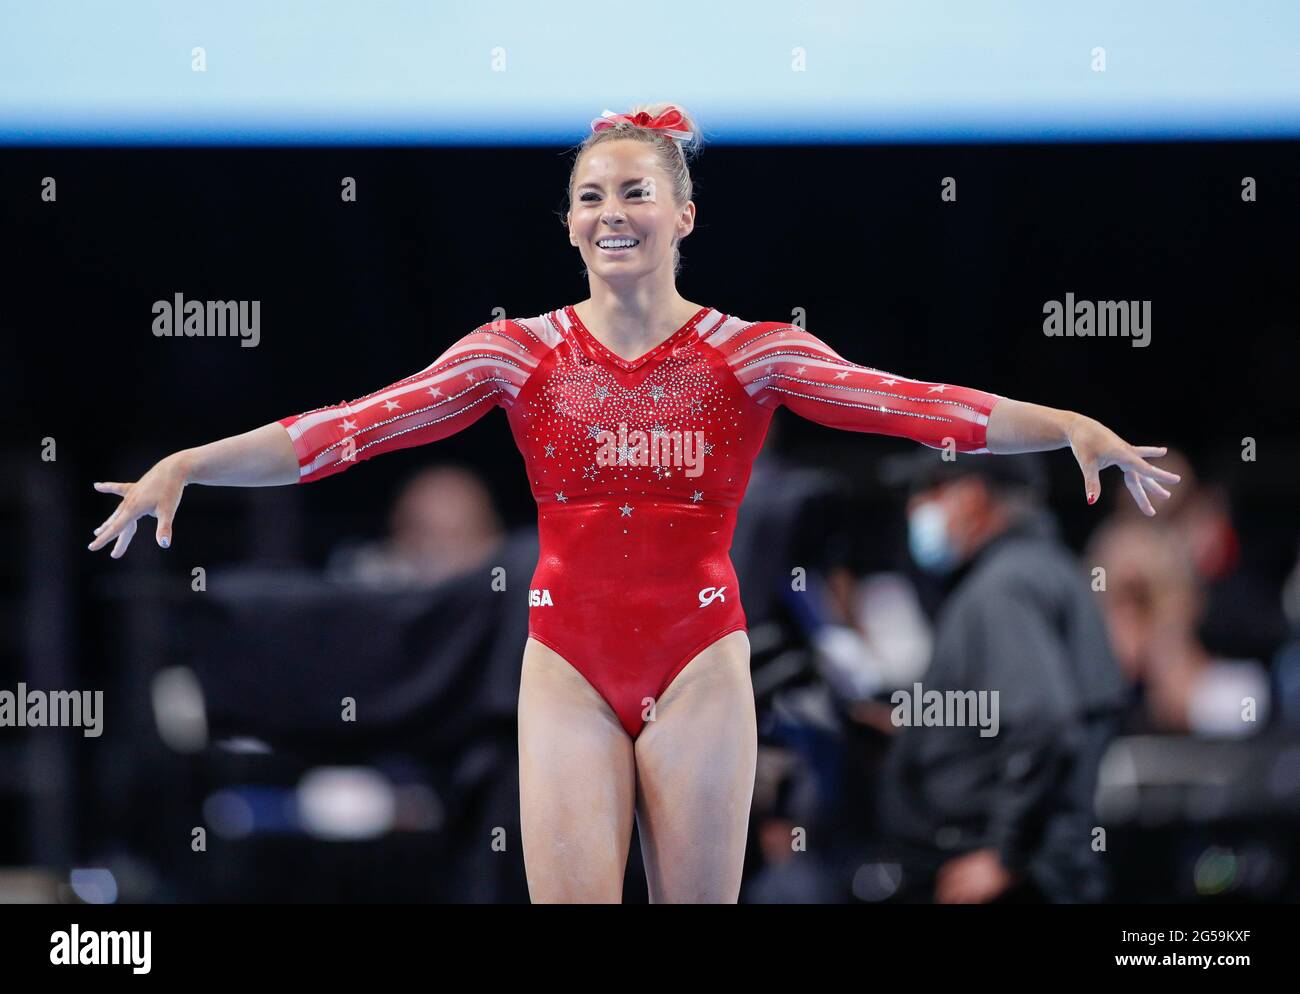 St Louis, USA. 25th June, 2021. June 25, 2021: MyKayla Skinner smiles after her floor routine during Day 1 of the 2021 U.S. Women's Gymnastics Olympic Team Trials at the Dome at America's Center in St. Louis, MO. Kyle Okita/CSM Credit: Cal Sport Media/Alamy Live News Stock Photo